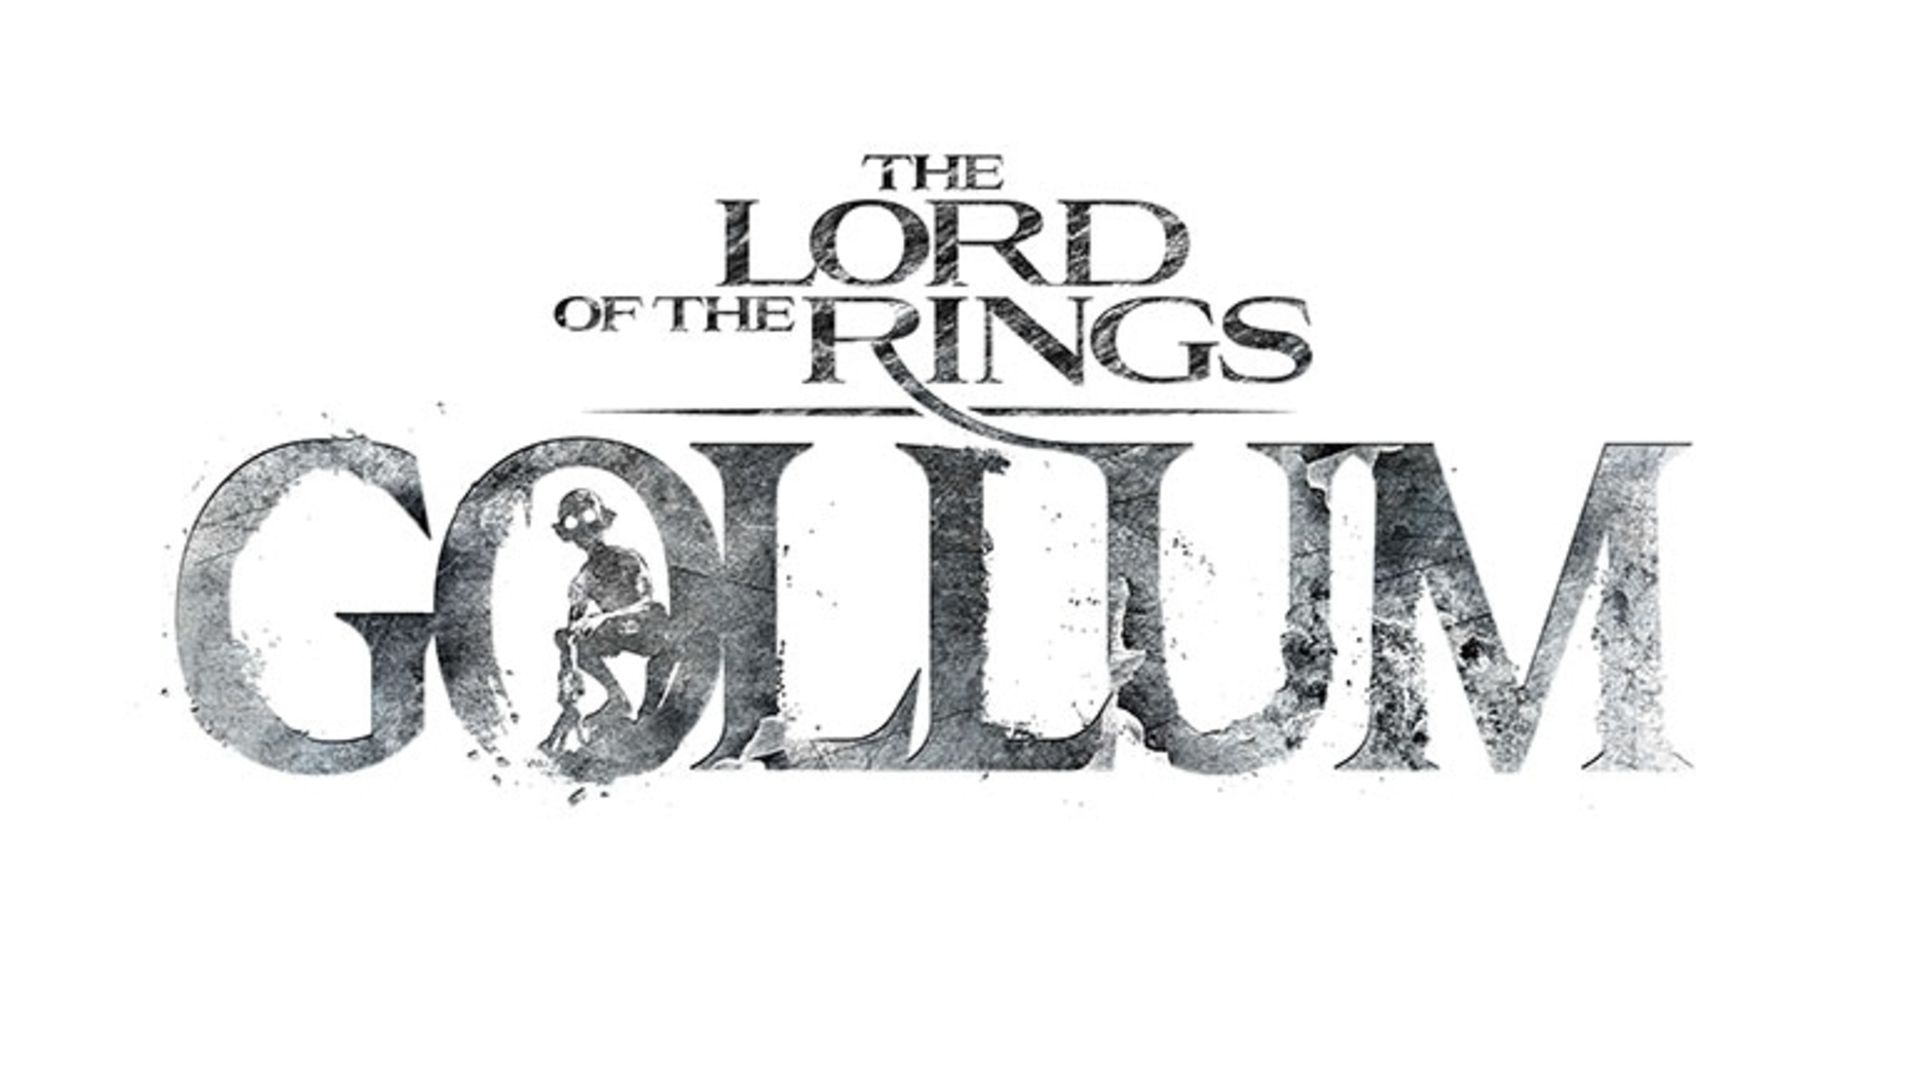 The Lord of the Rings - Gollum